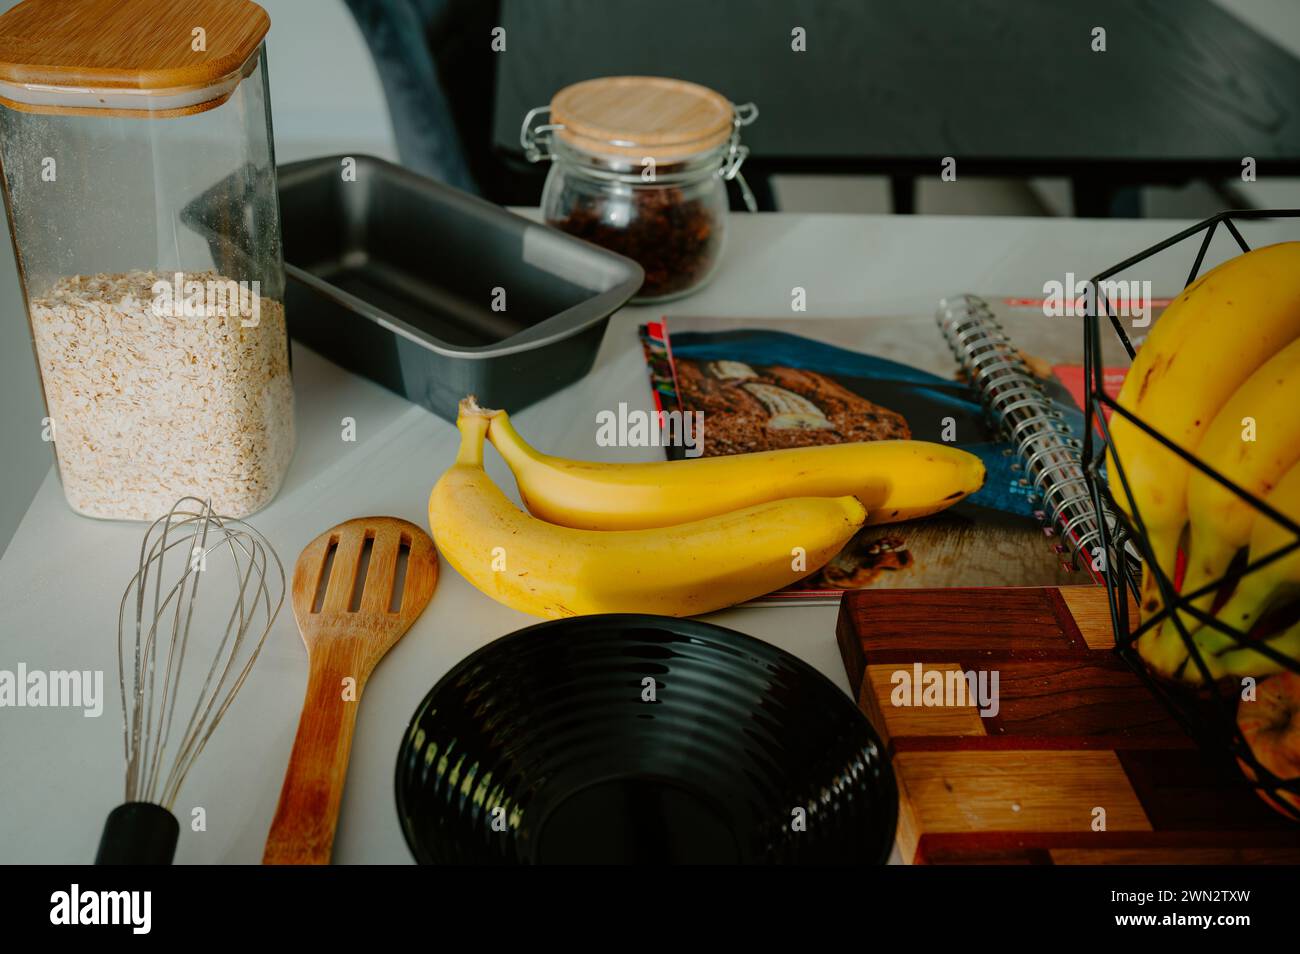 Gearing up for baking success: Fresh banana, pot, and cookbook in frame Stock Photo